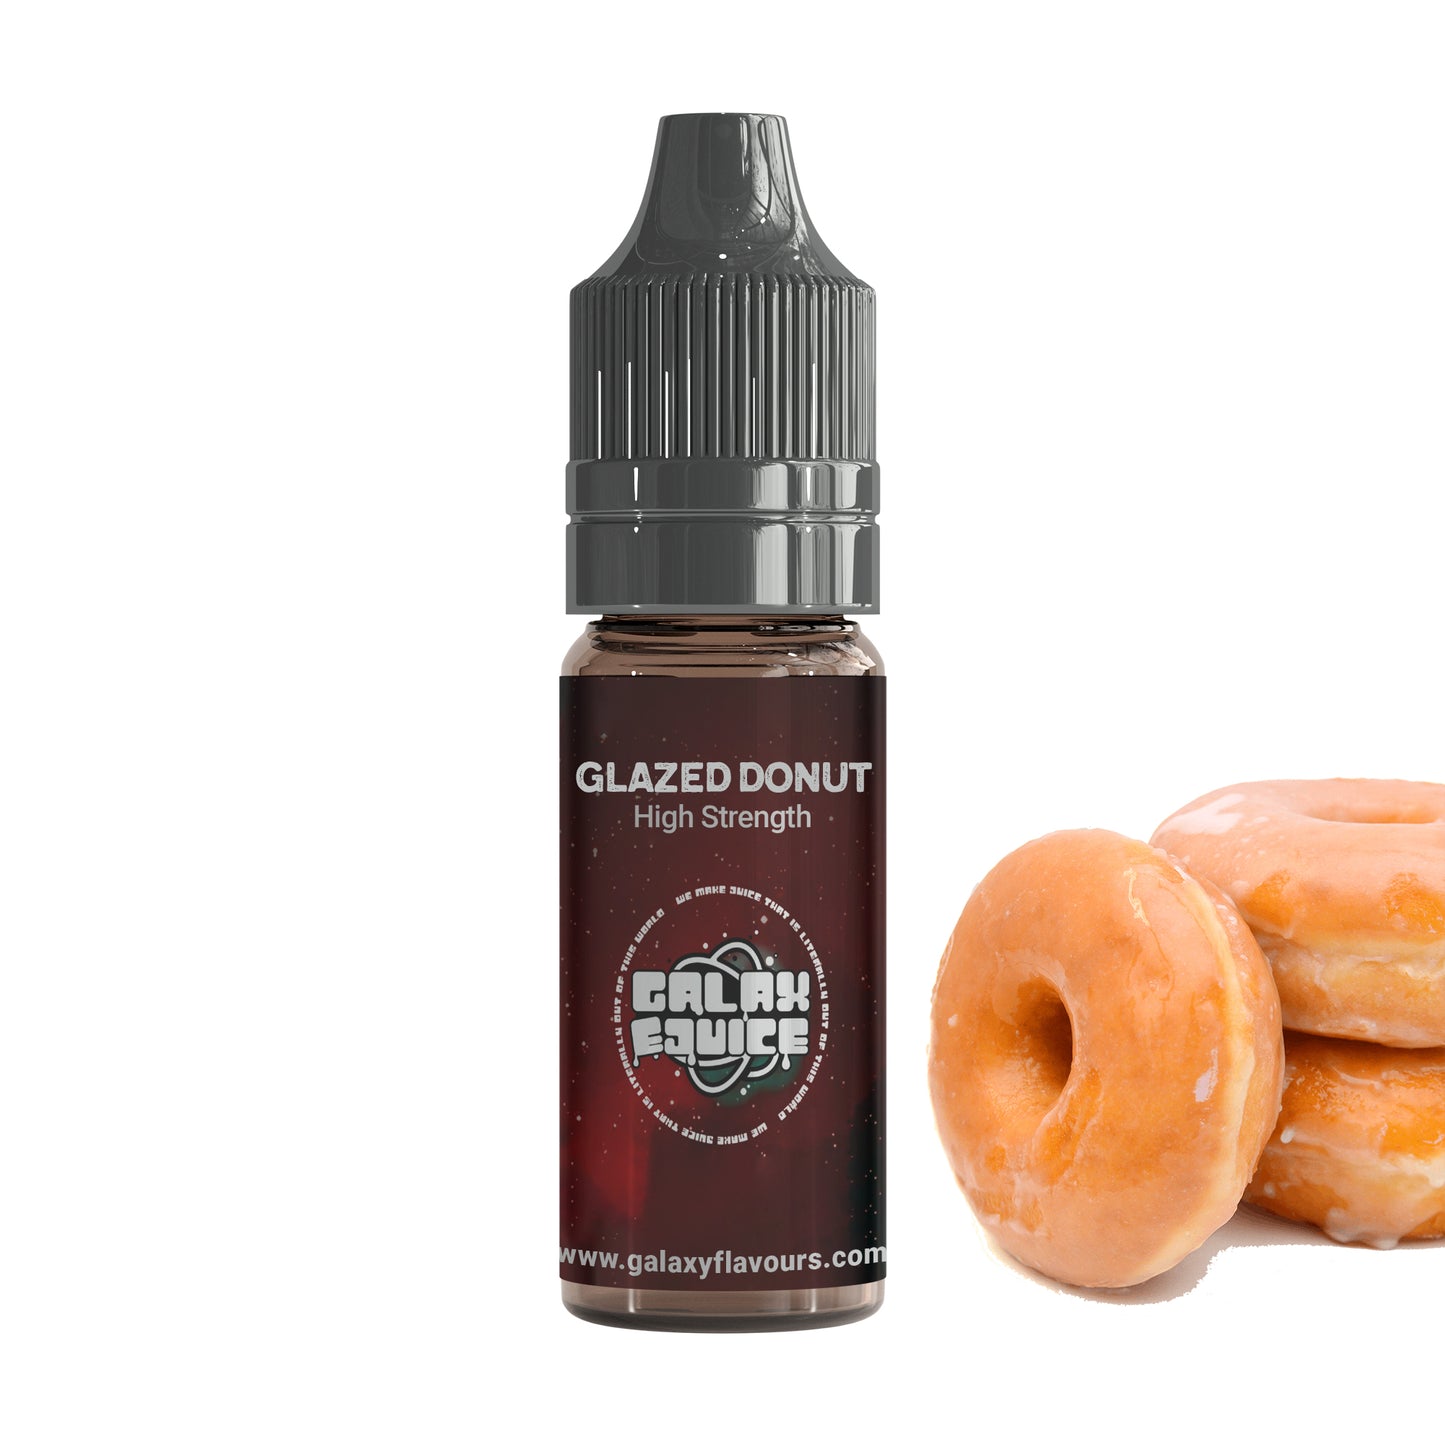 Glazed Donut High Strength Professional Flavouring.